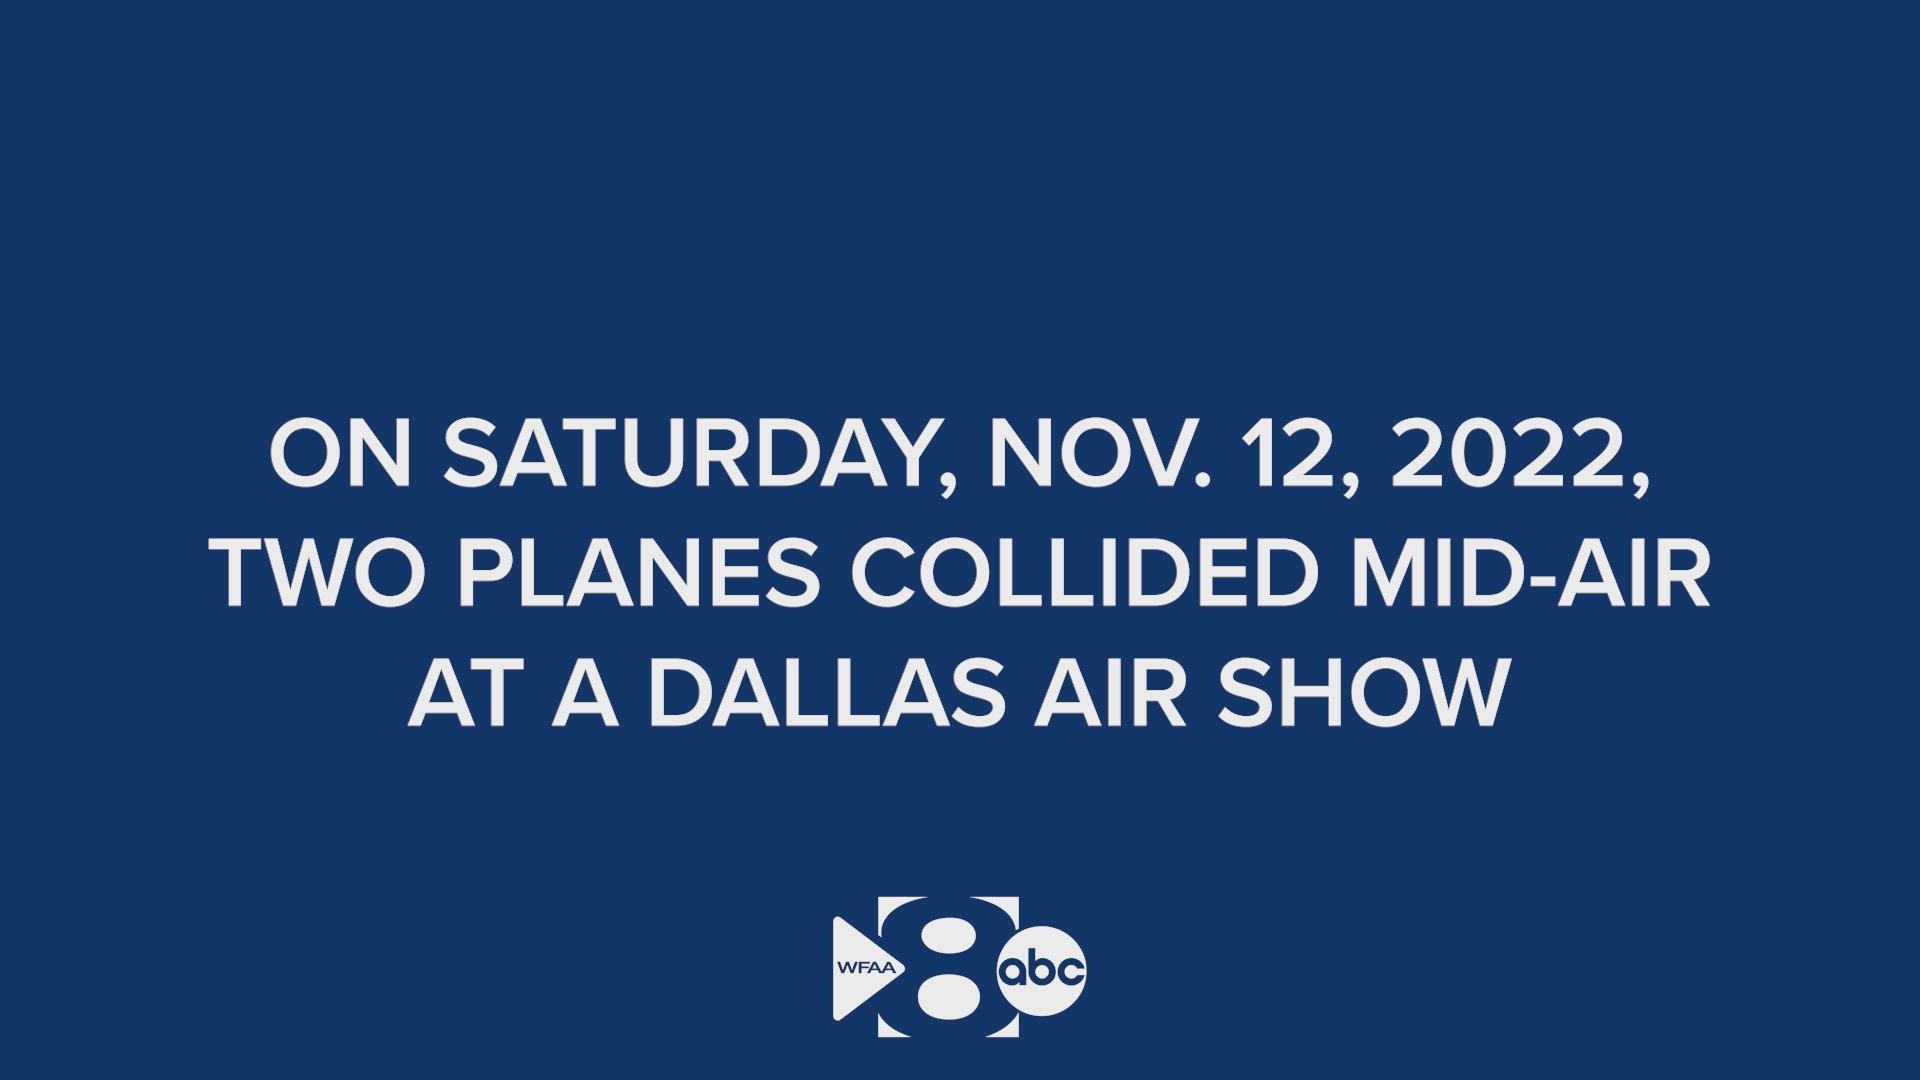 Dallas air show plane crash New video released by NTSB